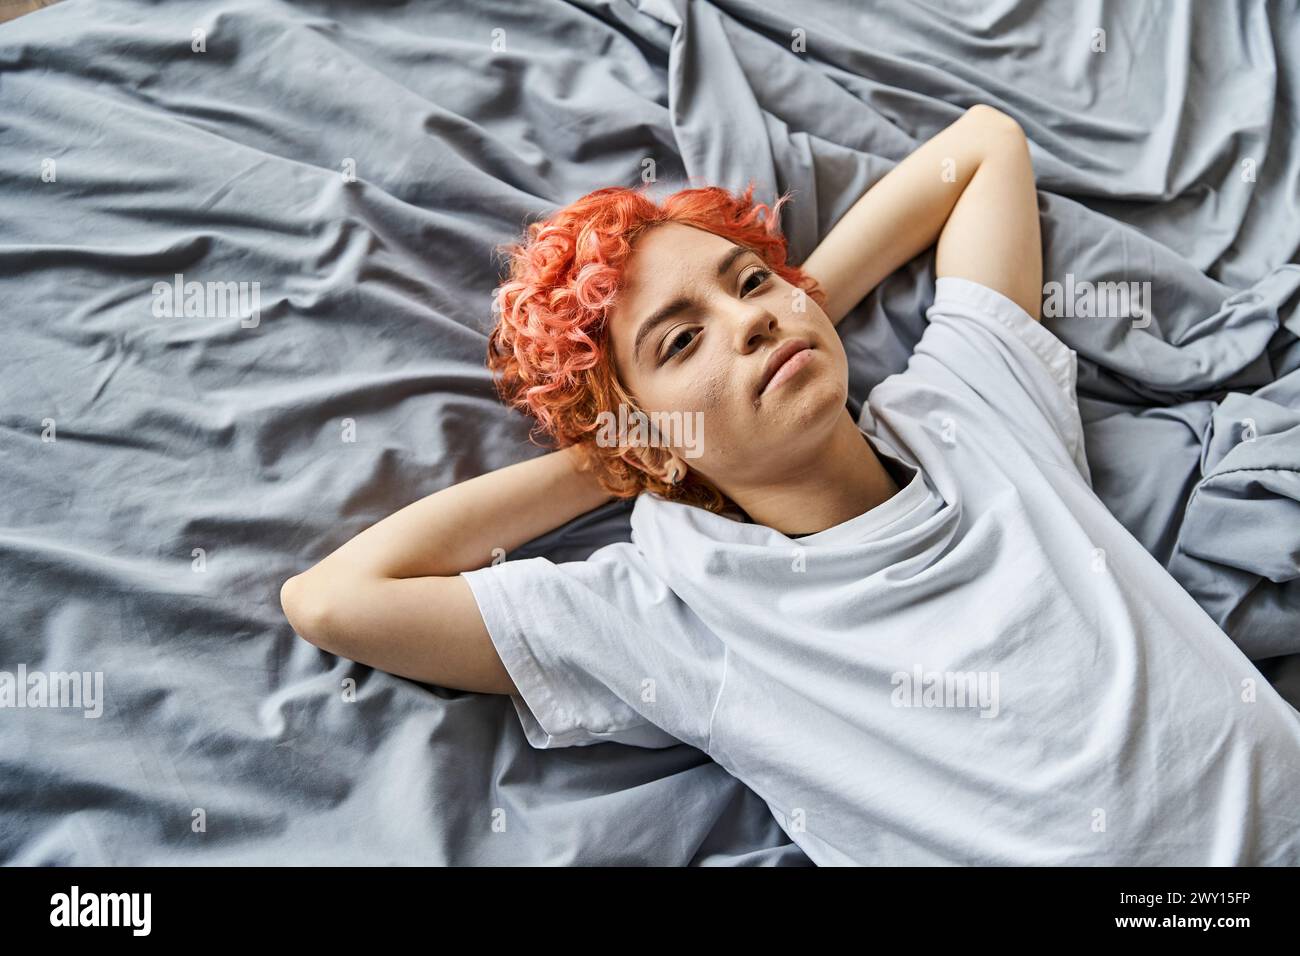 appealing extravagant person with red vibrant hair lying in her bed and looking away, leisure time Stock Photo